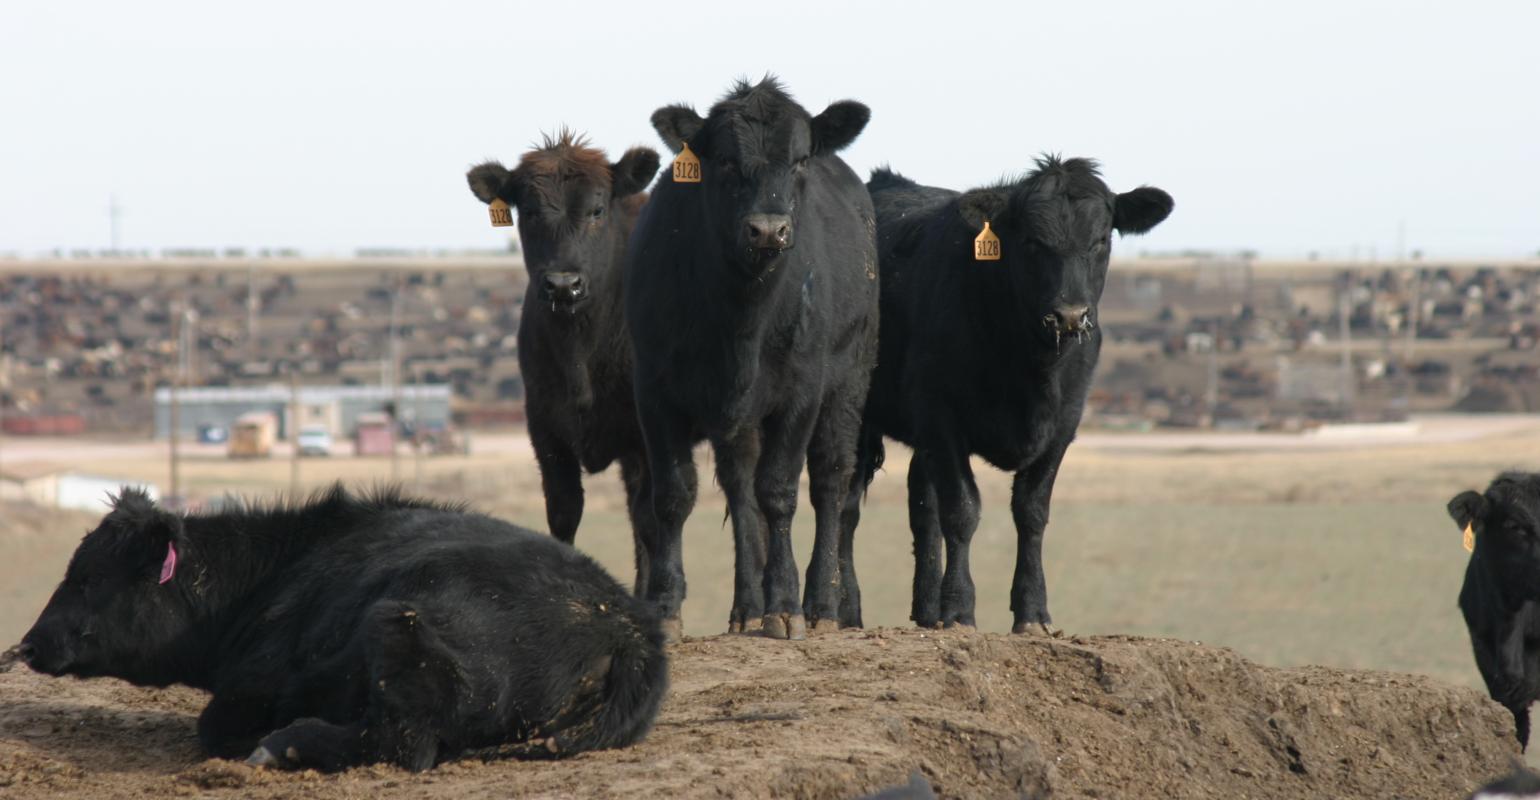 Feedlot Production and Cattle Slaughter Analysis from Dr. Peel